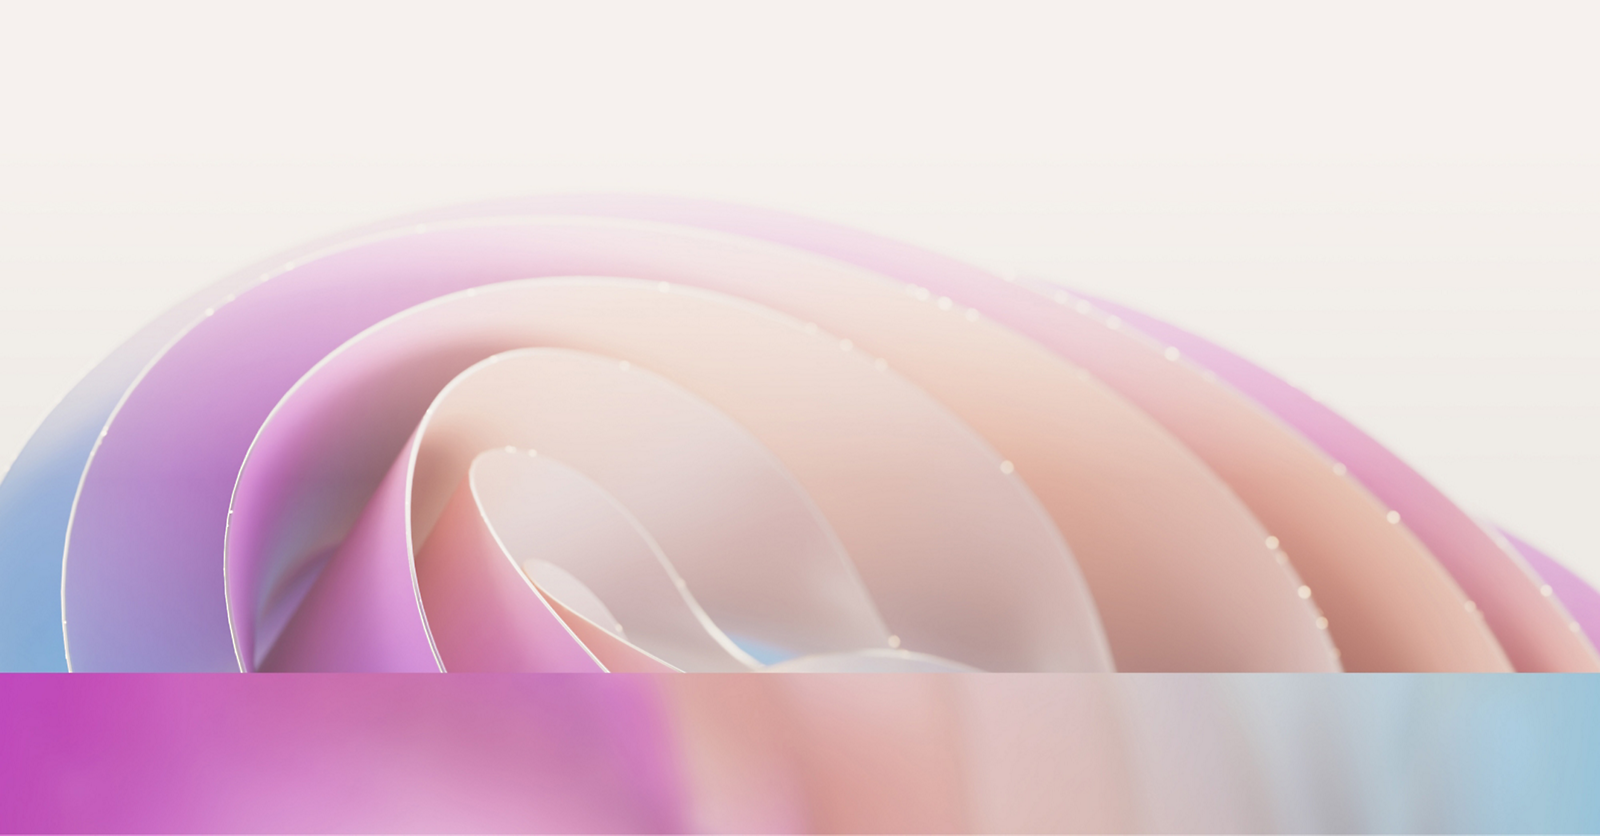 Abstract image showing soft, overlapping colorful curves in pastel shades of pink, purple, and blue 